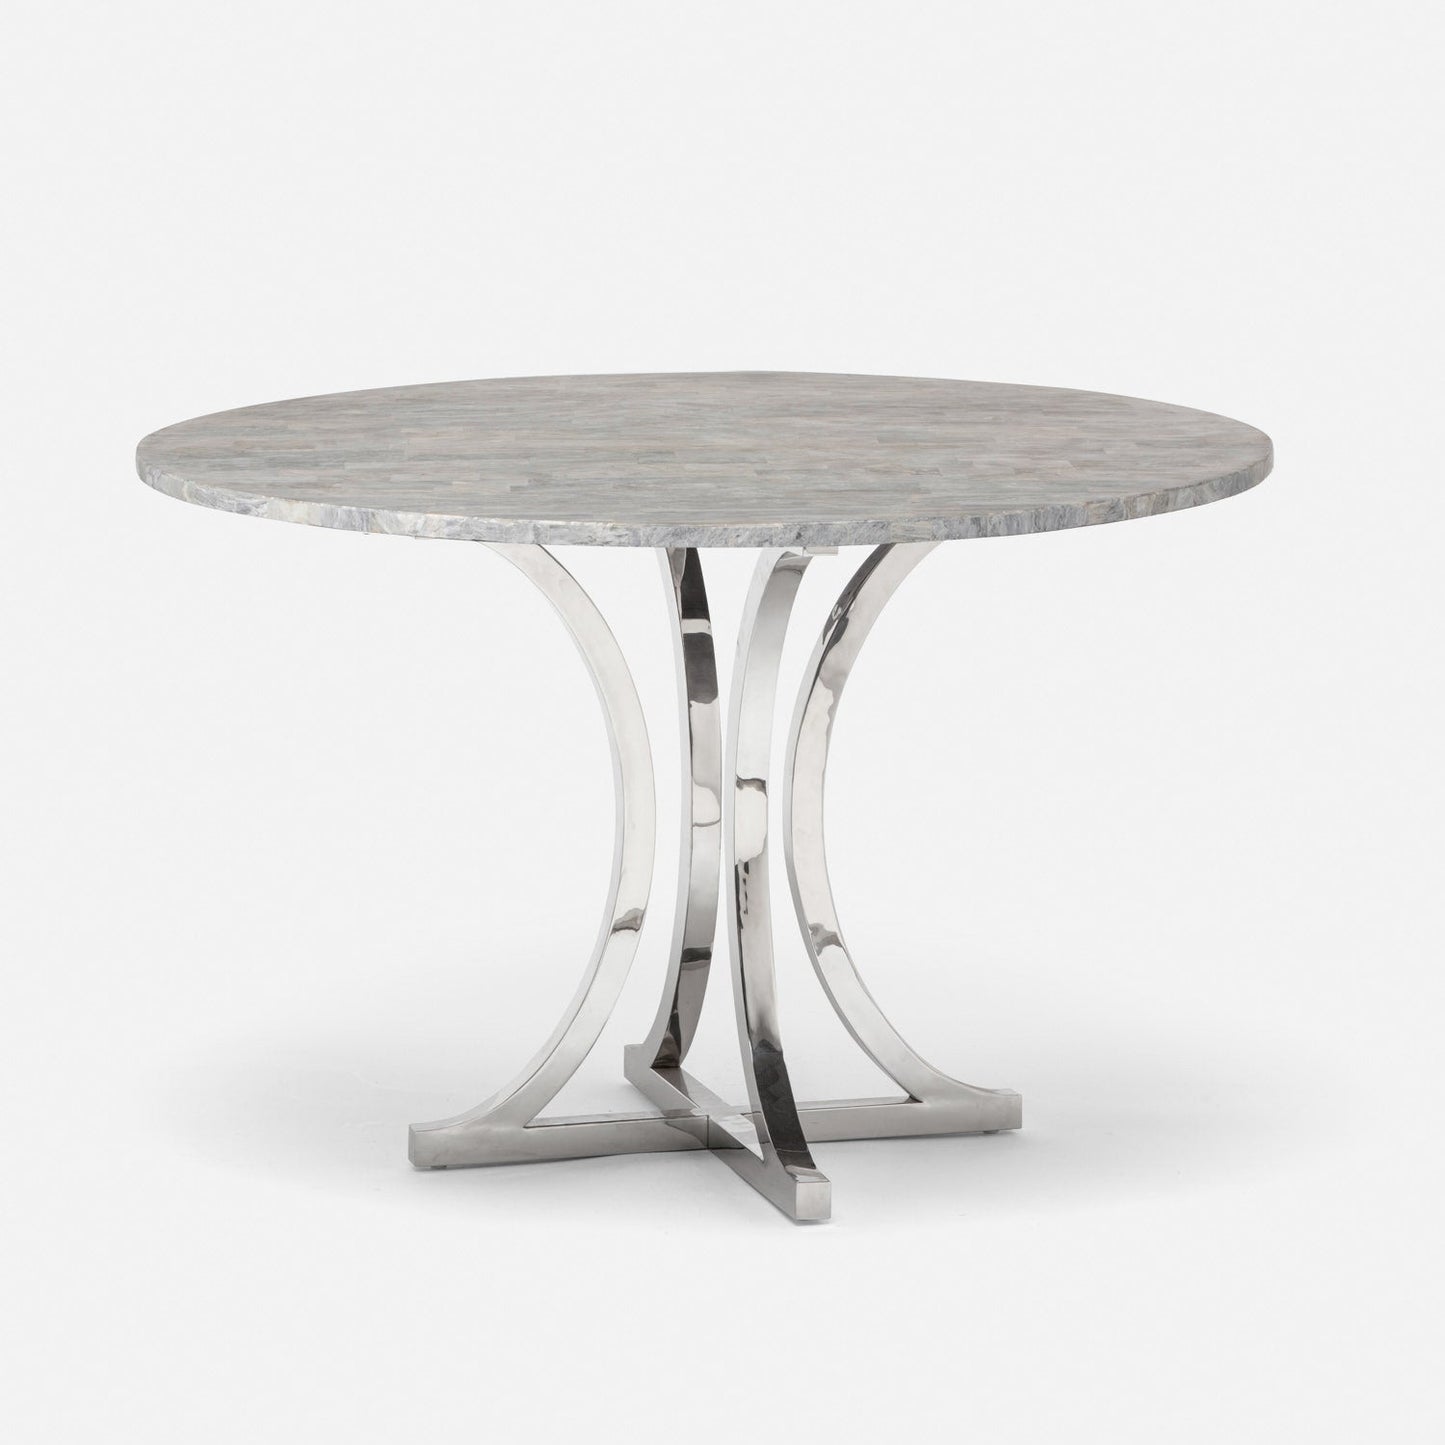 Made Goods Leighton 60" x 30" Polished Silver Steel Dinning Table With Round Gray Romblon Stone Table Top